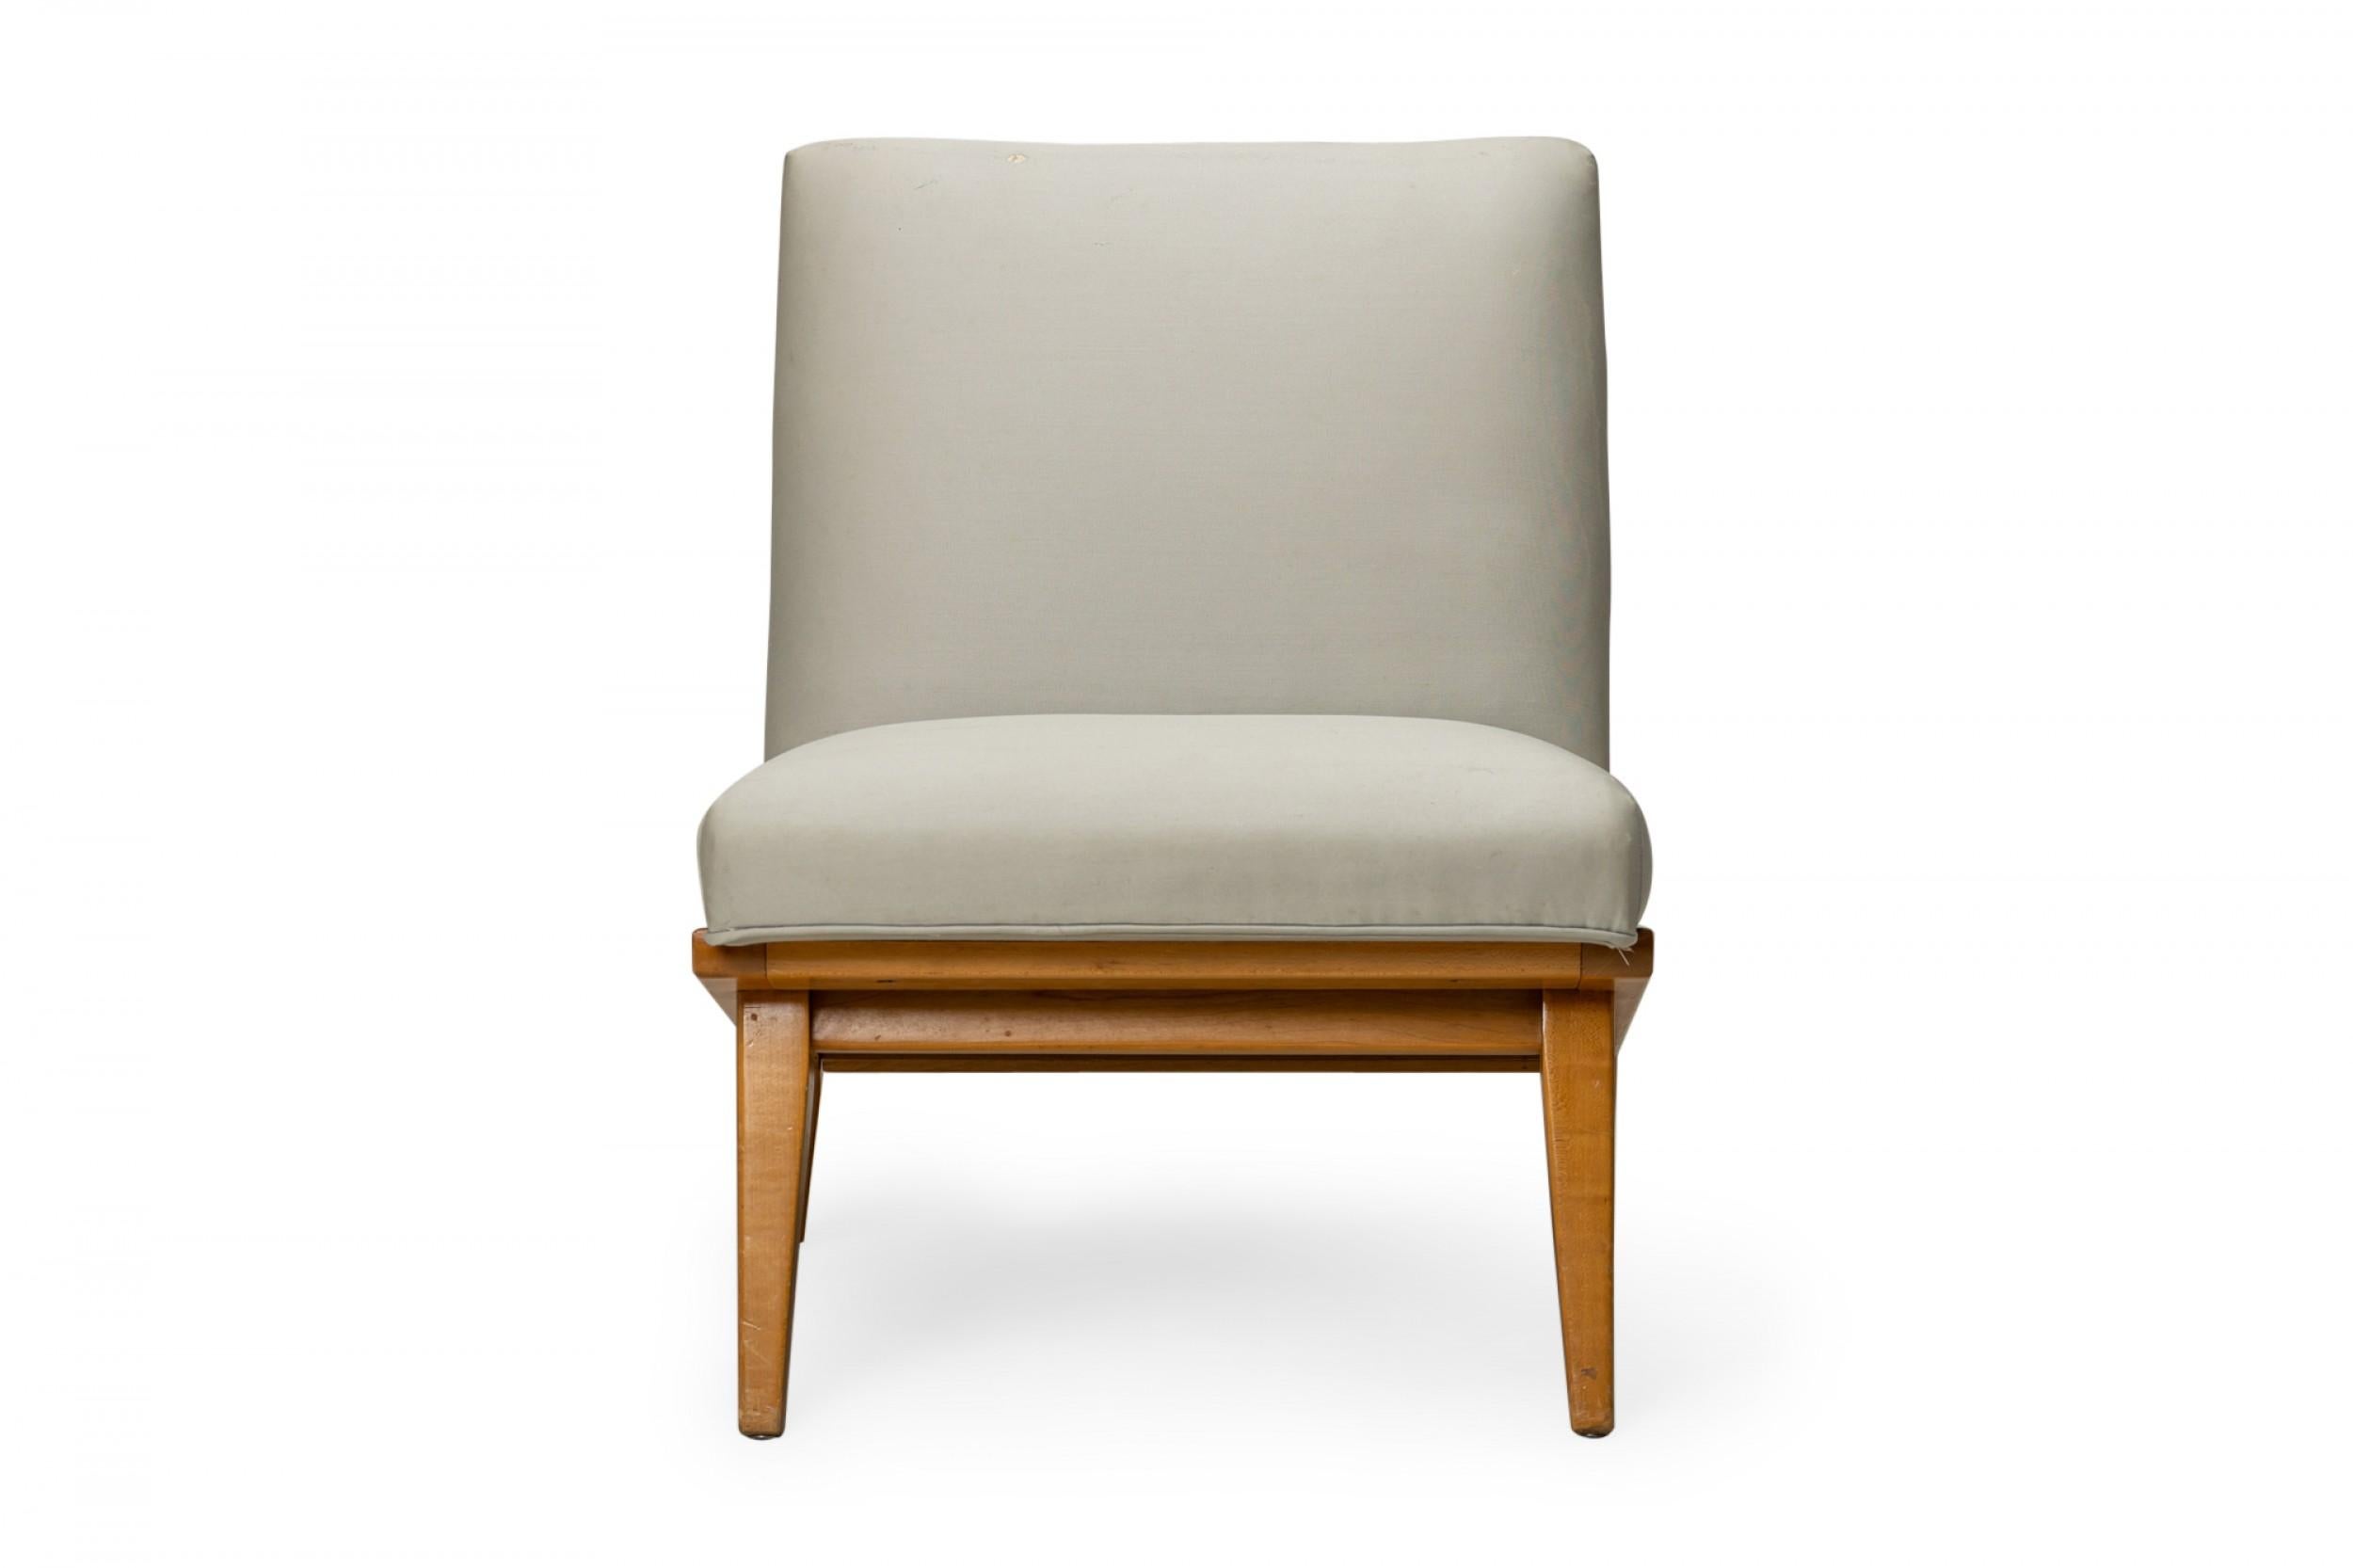 Mid-Century Modern slipper / side chair with light gray sateen fabric upholstery, resting on an angled blonde wood base with angled and tapered legs. (JENS RISOM FOR KNOLL)(Similar pieces: DUF0453-DUF0455)
